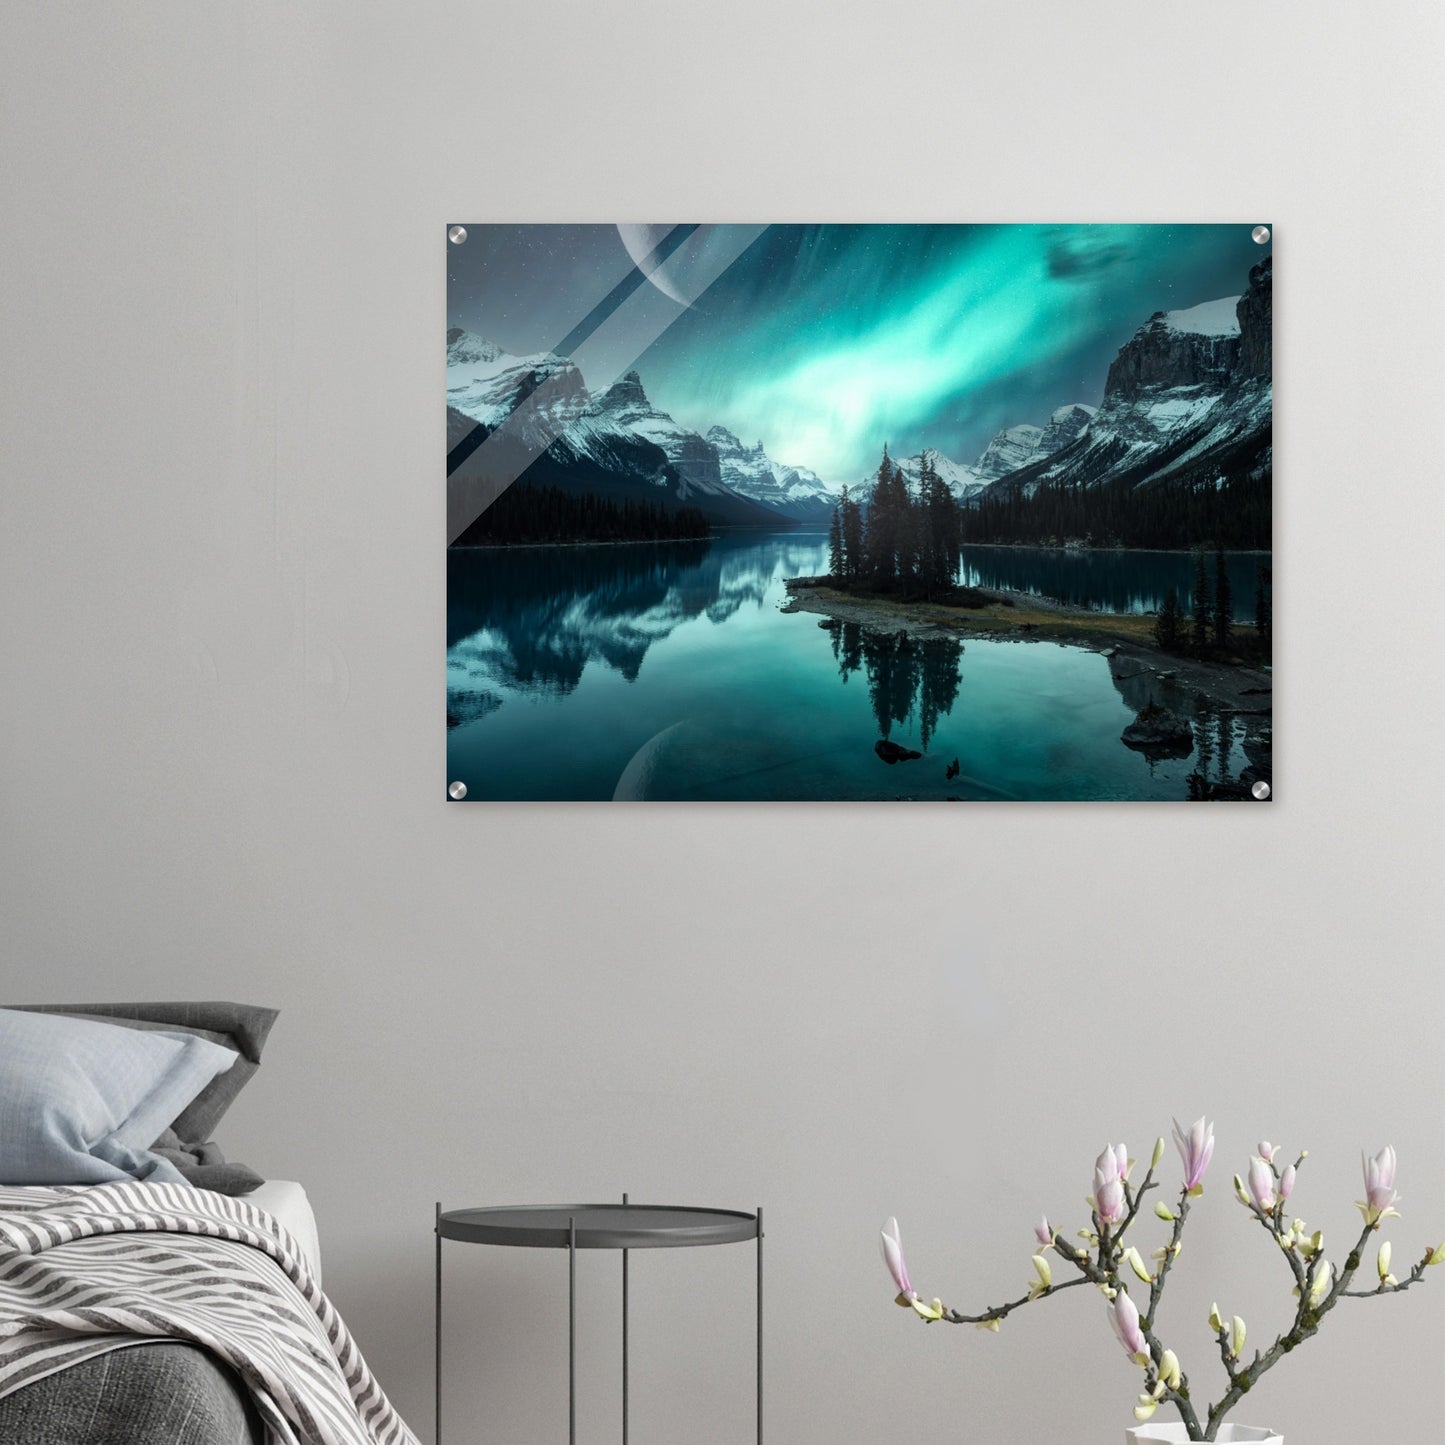 Unique Aurora Borealis Acrylic Prints - Multi Size Personalized Northern Light View - Modern Wall Art - Perfect Aurora Lovers Gift 8